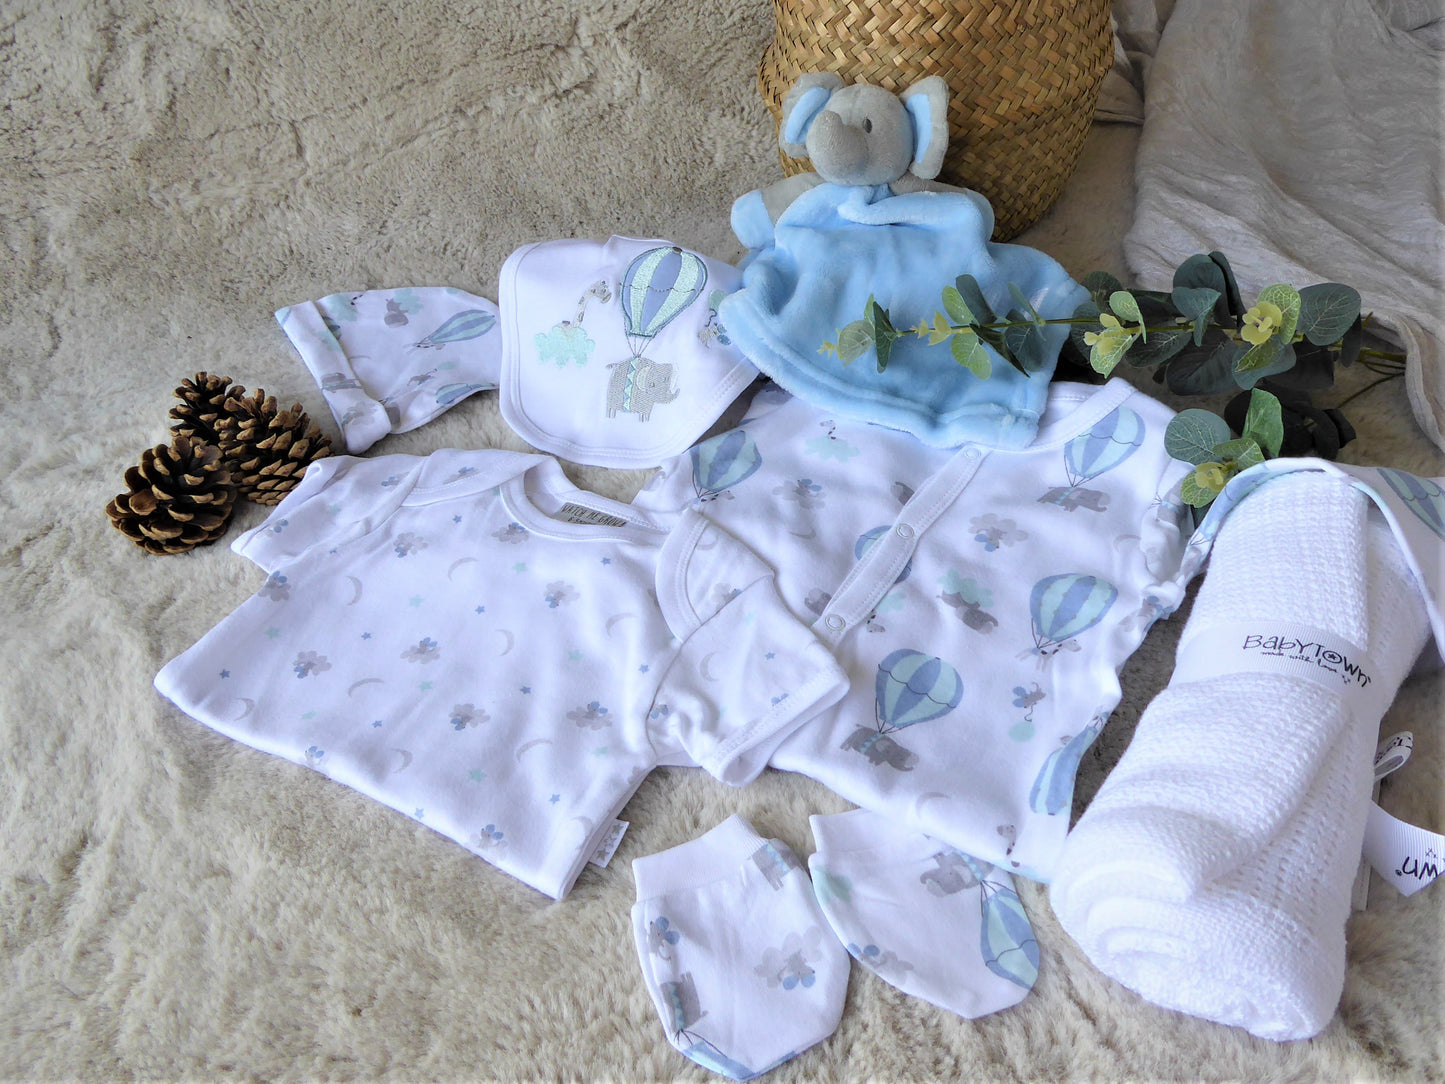 High in the Sky Baby Bundle